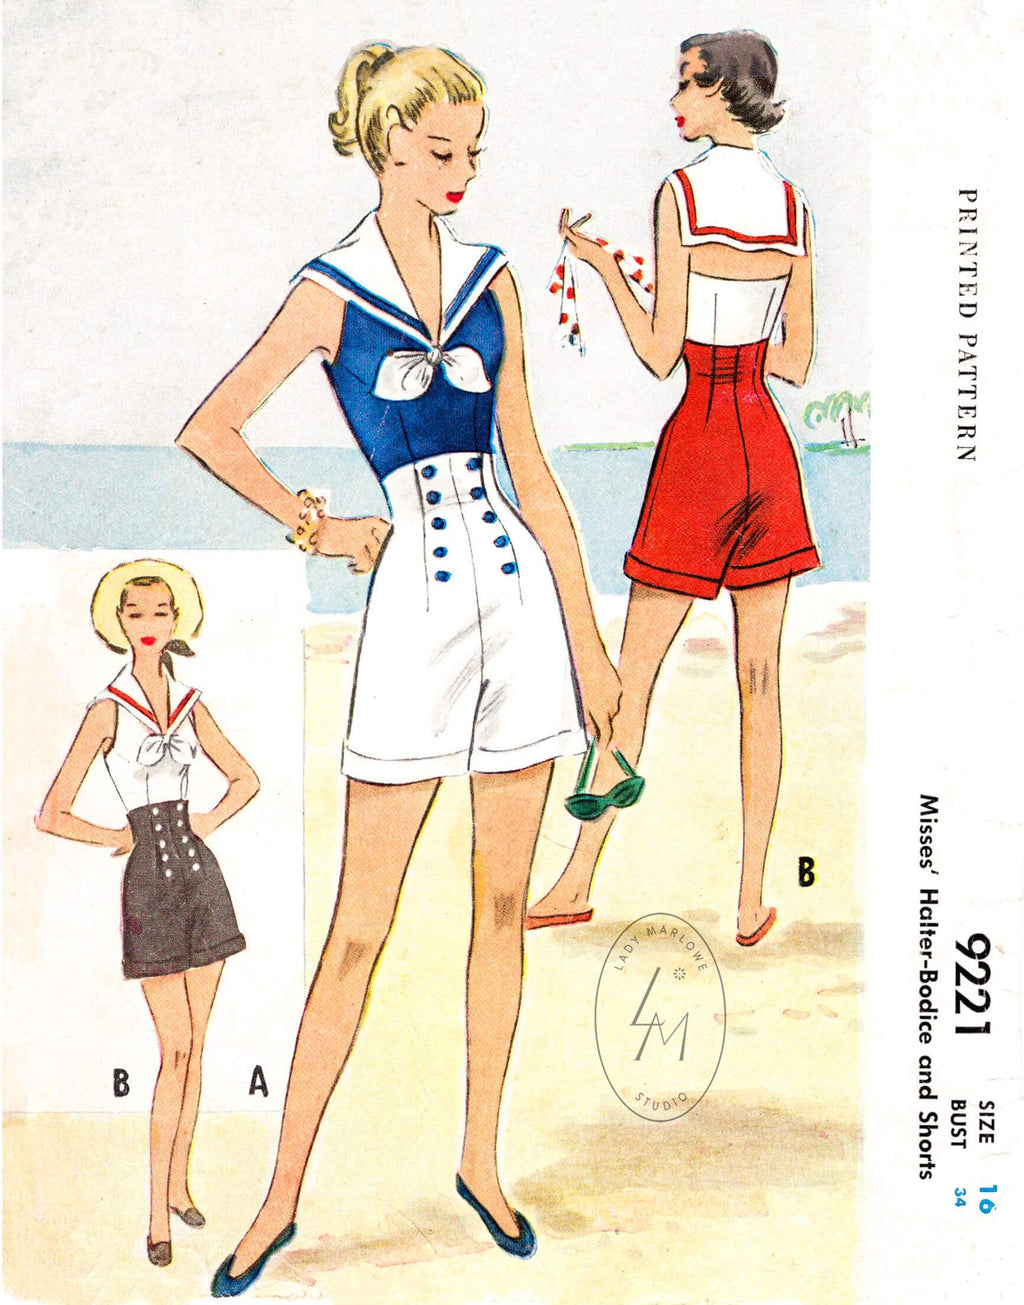 McCall's 9221 1950s playsuit vintage sewing pattern reproduction